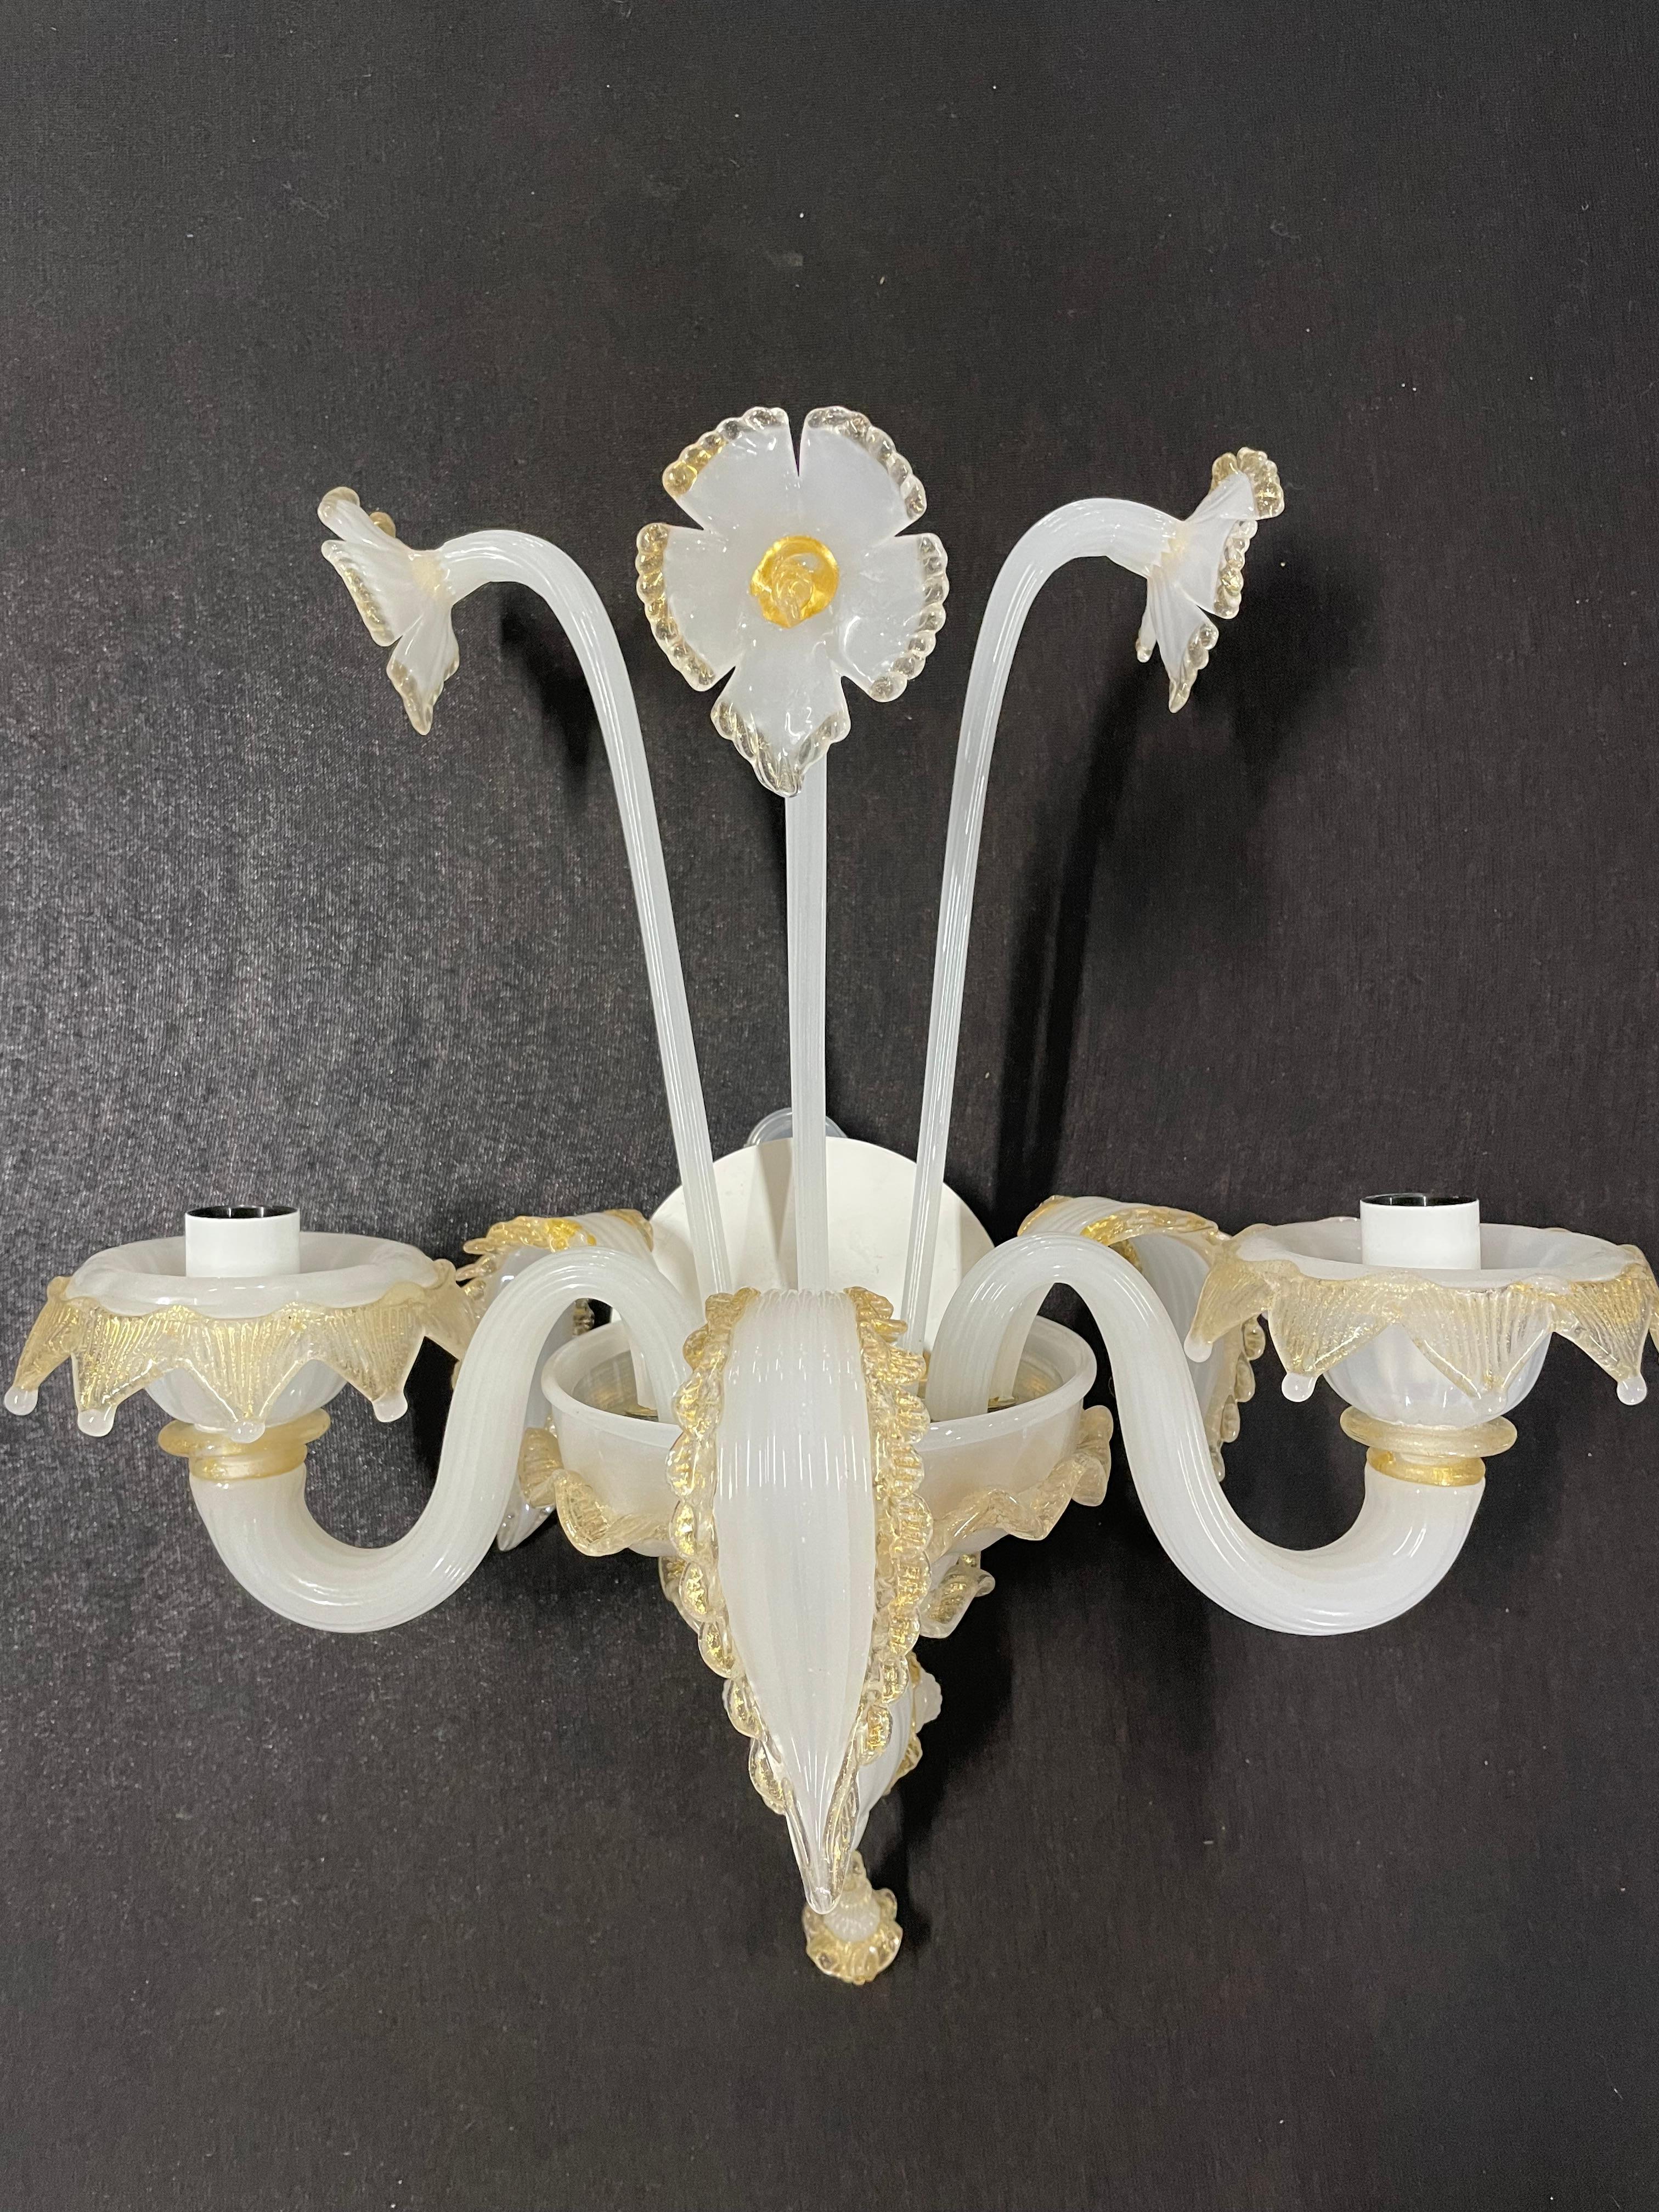 Pair of Murano glass sconces with floral pattern. Has gold and off-white petals and leaves.